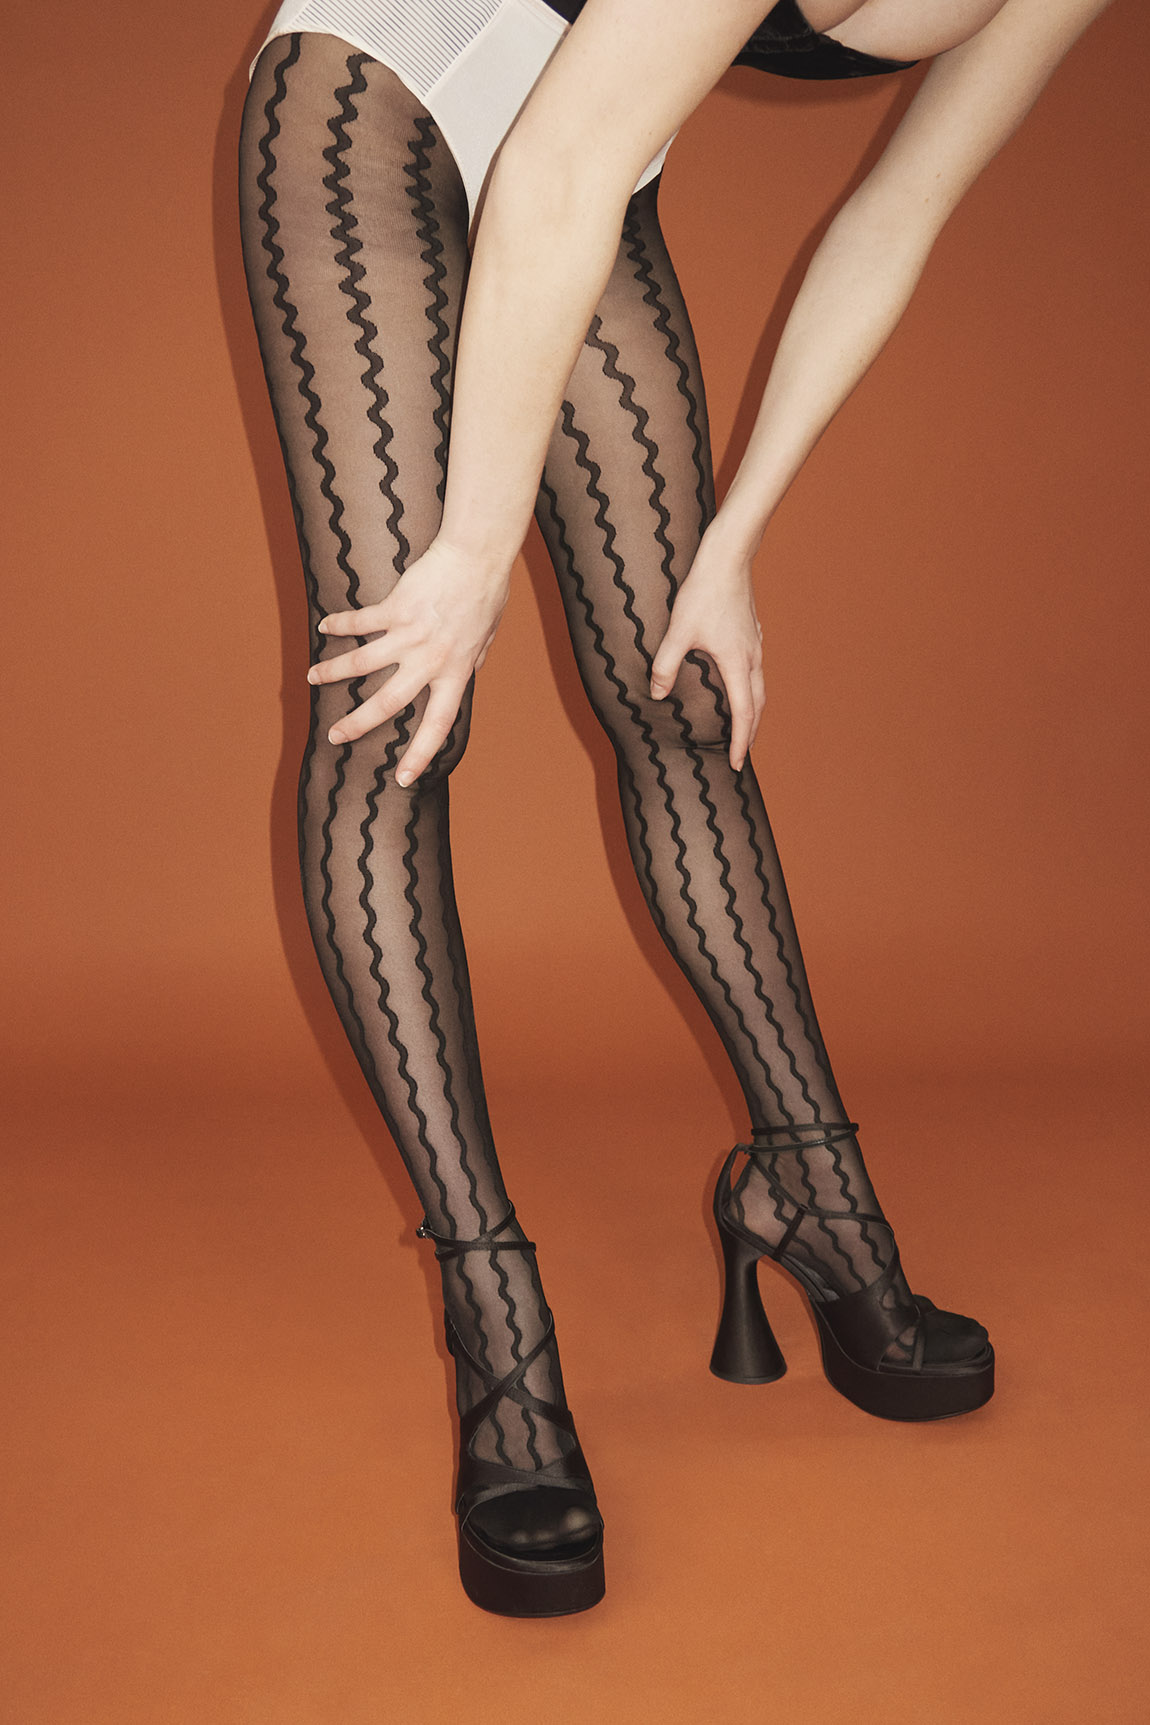 Swedish Stockings: Premium recycled tights, designed with the future in mind